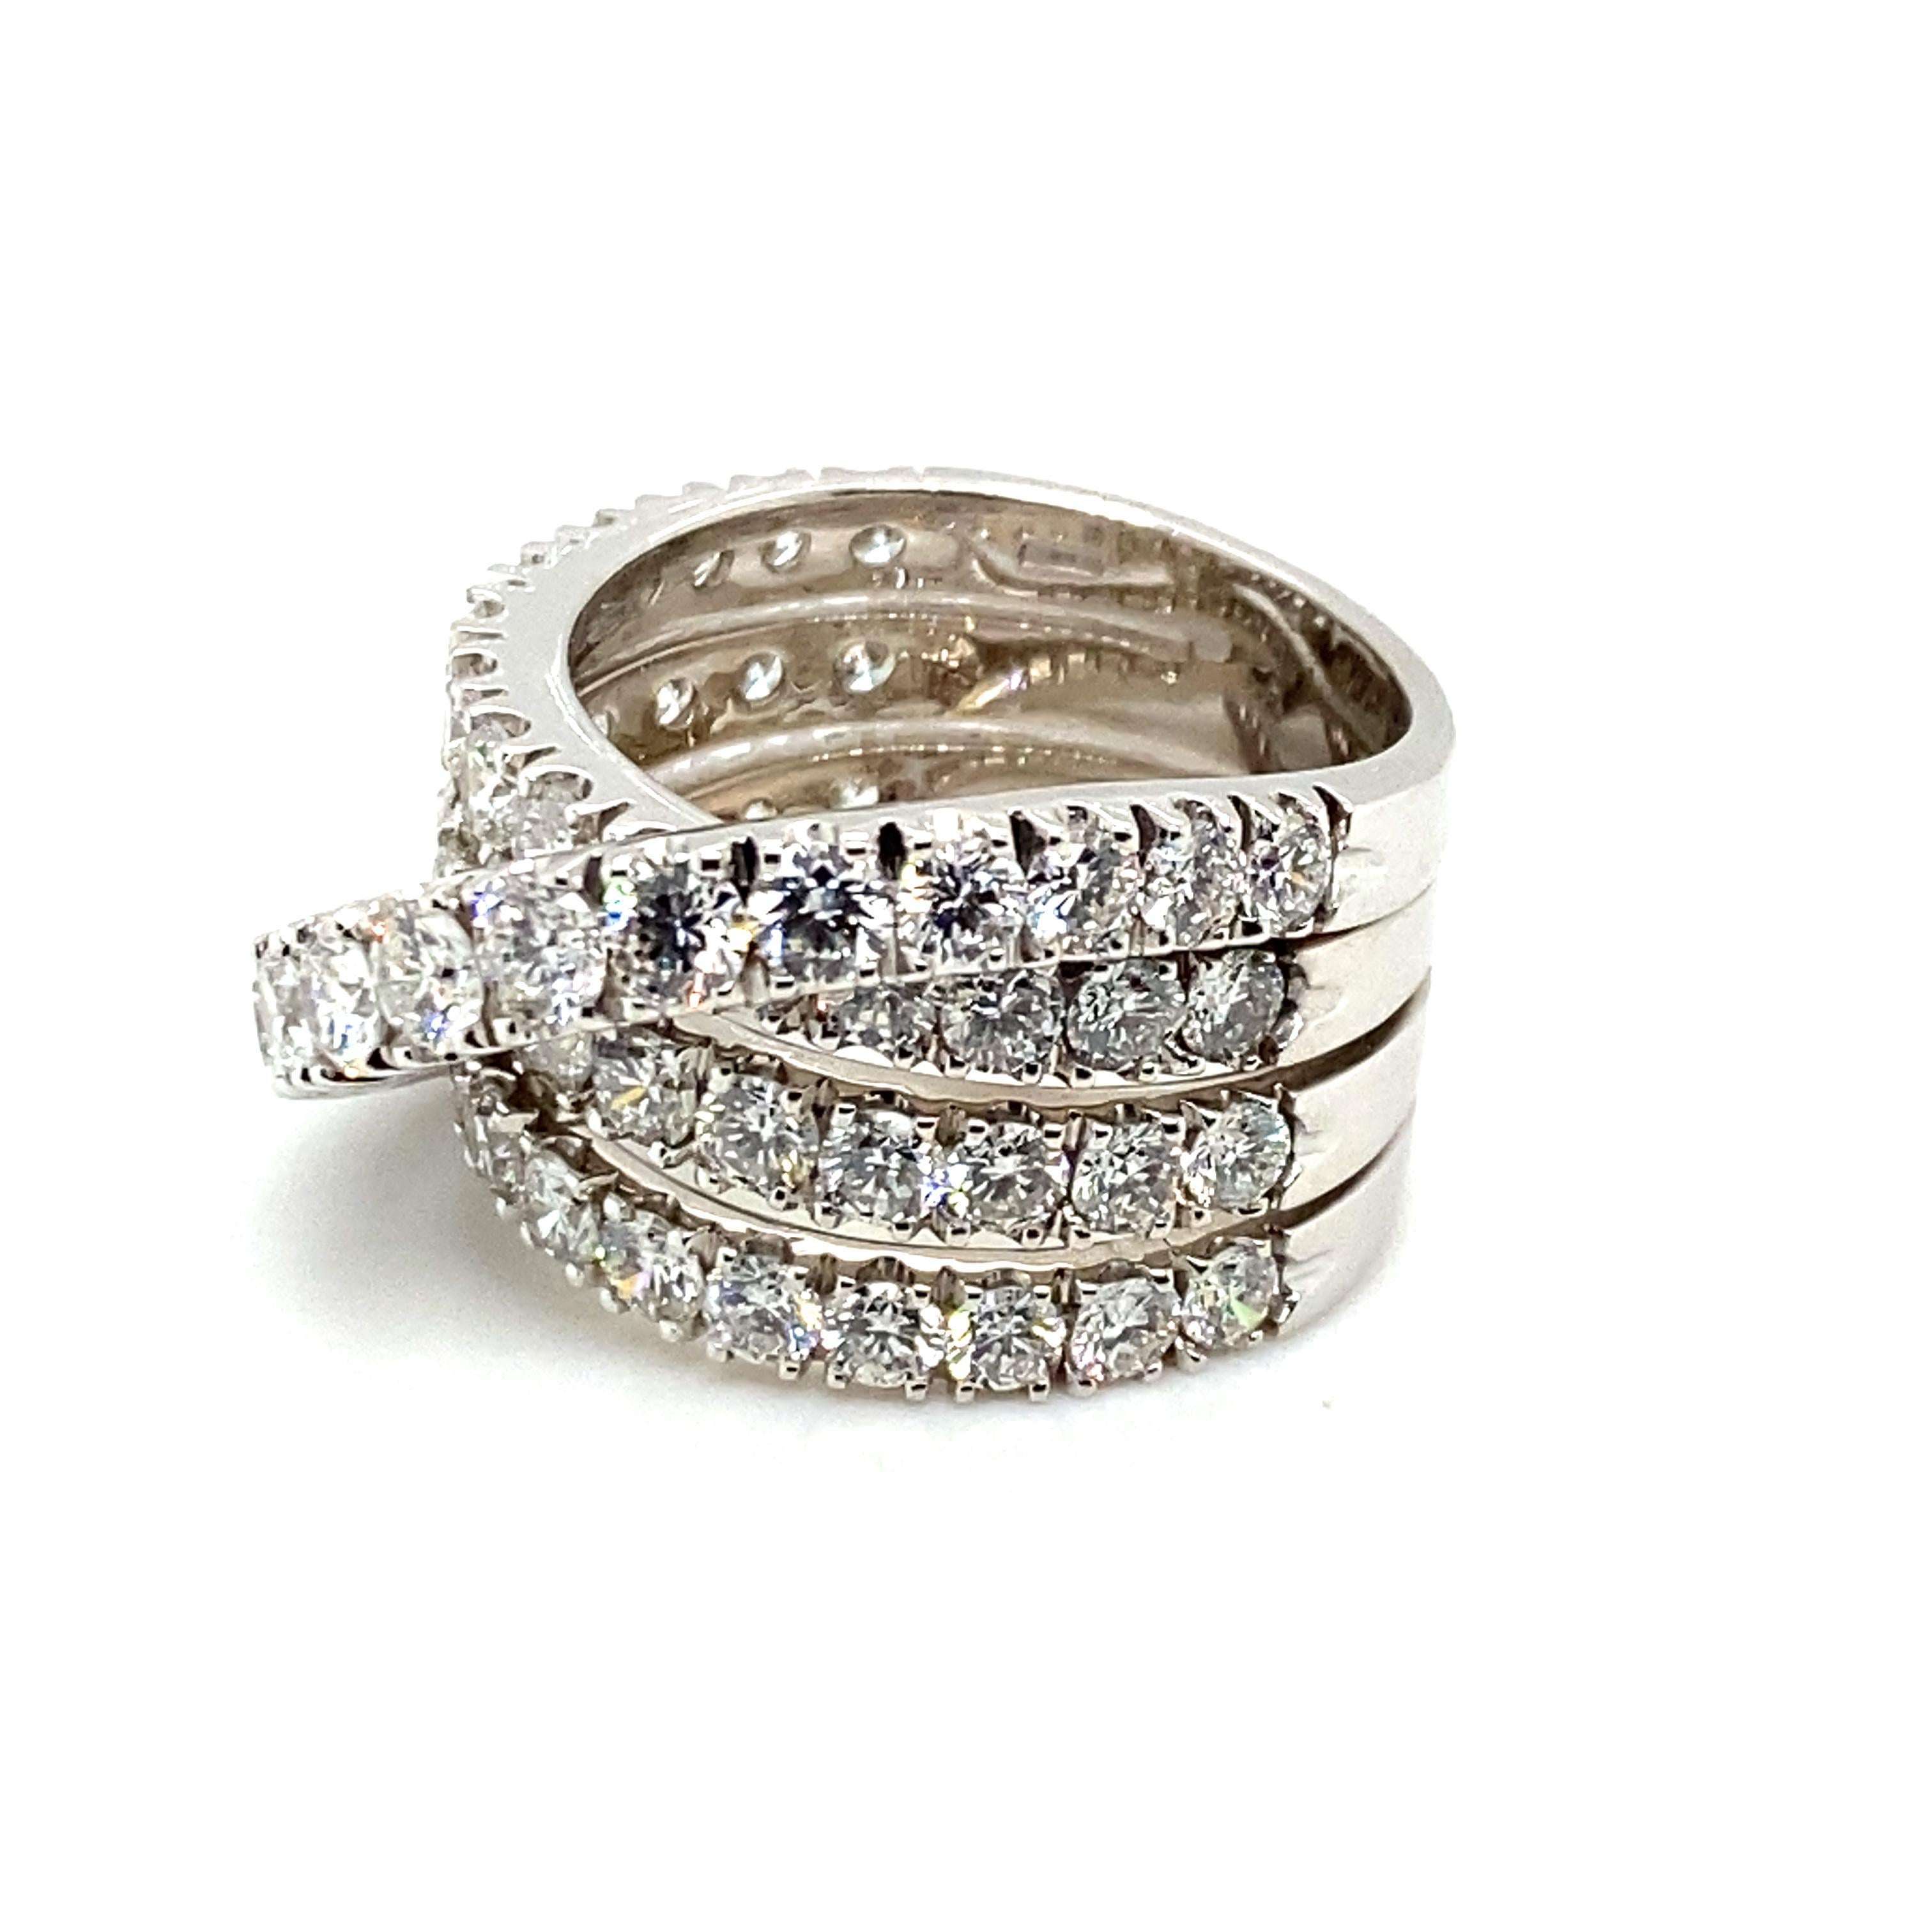 Contemporary Super Sparkling Diamond Ring by Crivelli in 18 Karat White Gold For Sale